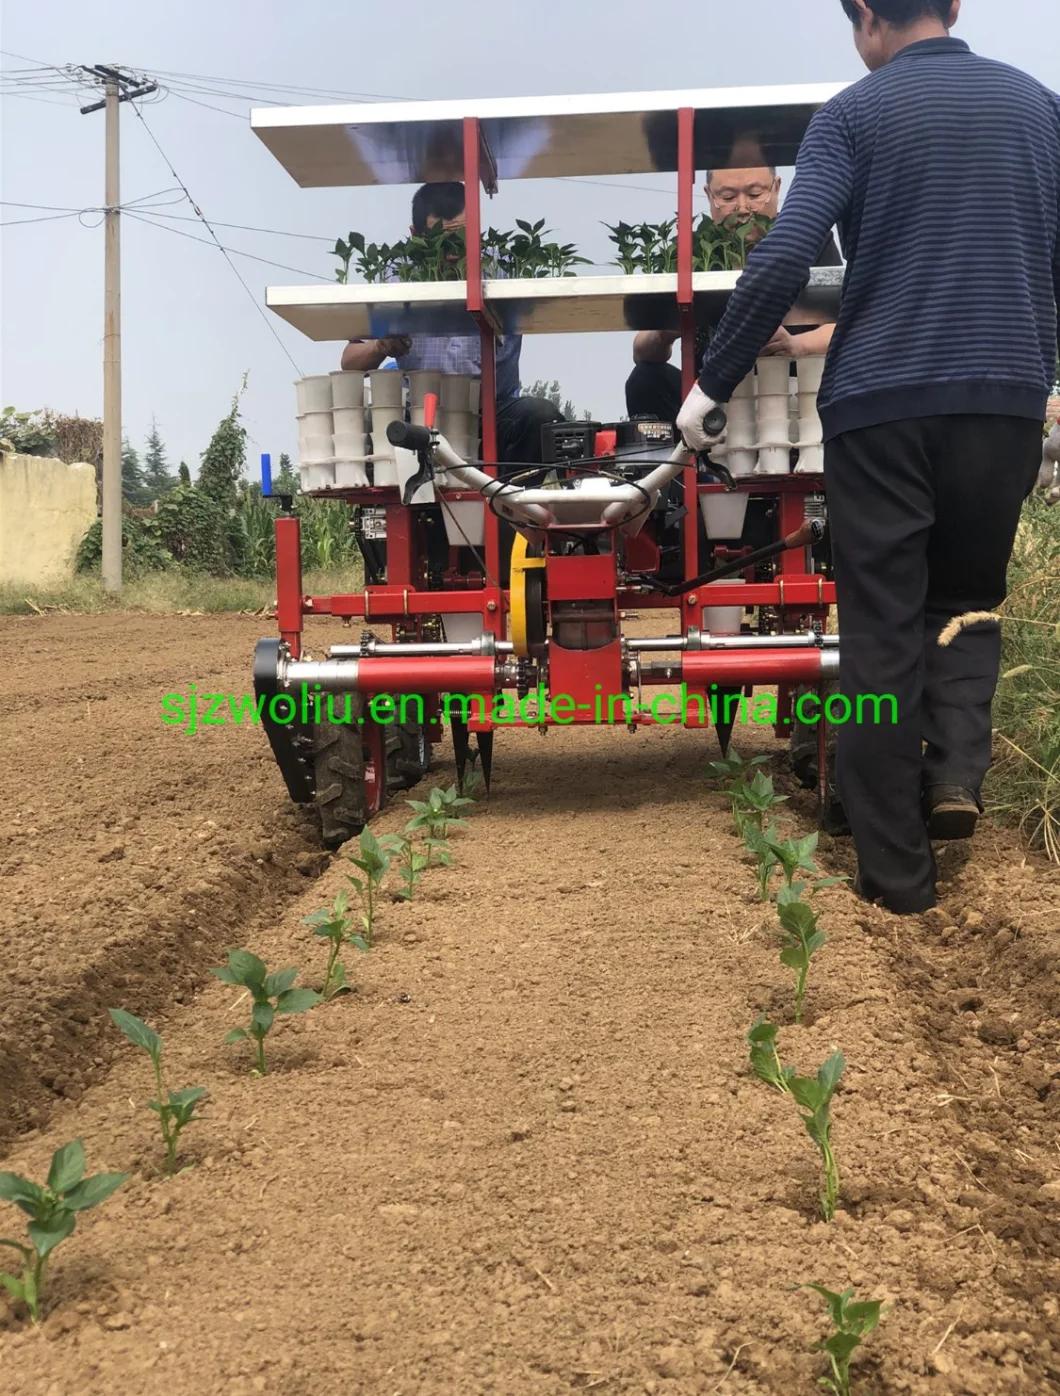 Hot Sale of 2 Rows of Self-Propelled Vegetable Trans Planter, Tomato, Pepper, Onion Transplanter, Farm Machine